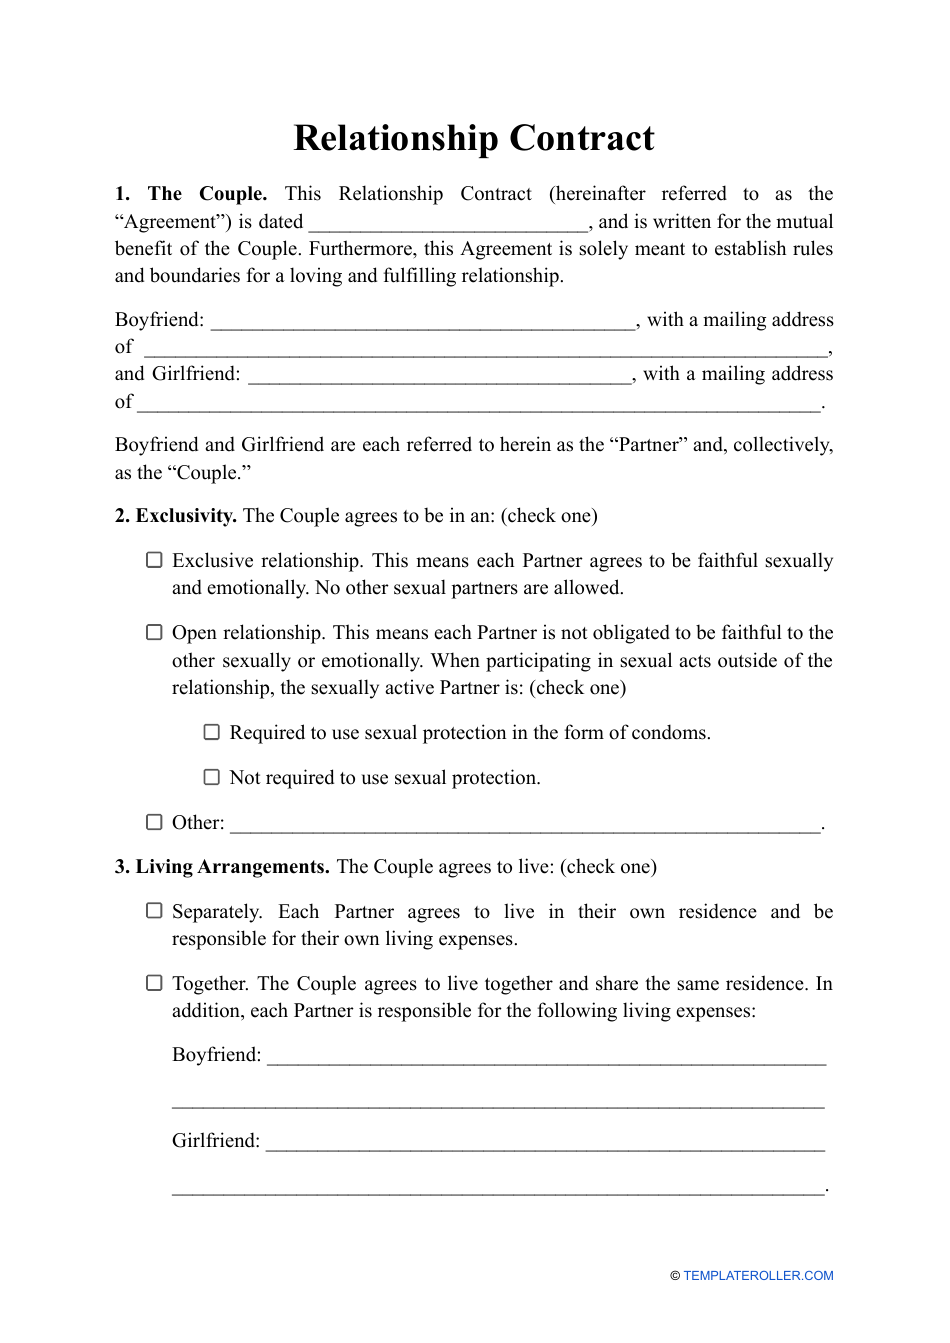 Relationship Contract Template Fill Out Sign Online and Download PDF